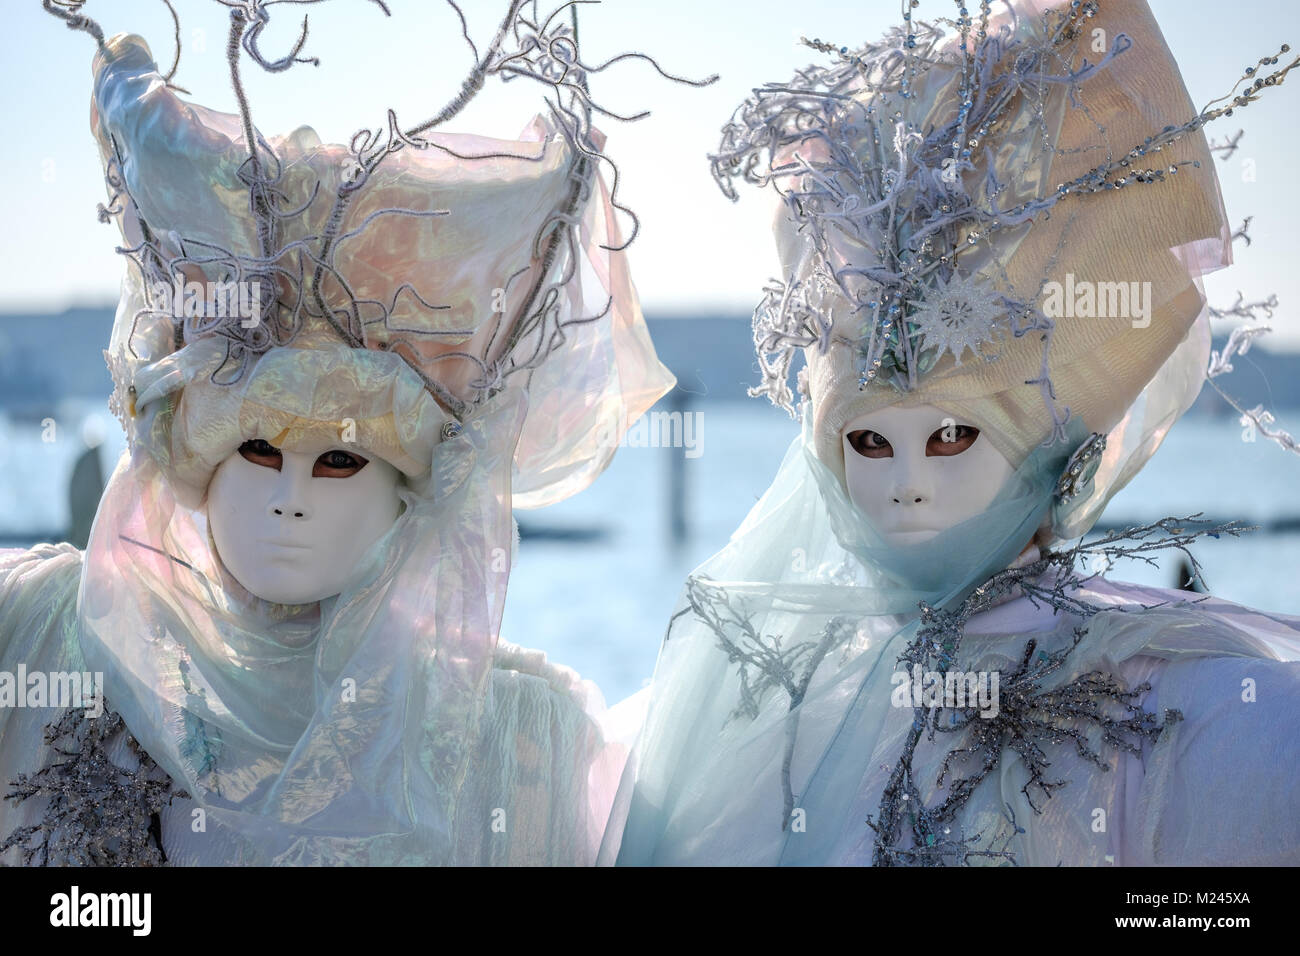 Venice Carnival 2018. After the opening event of the flying angel, Masks posing near Piazza San Marco. Venice, Italy. February 4, 2018. Credit: Gentian Polovina/Alamy Live News Stock Photo